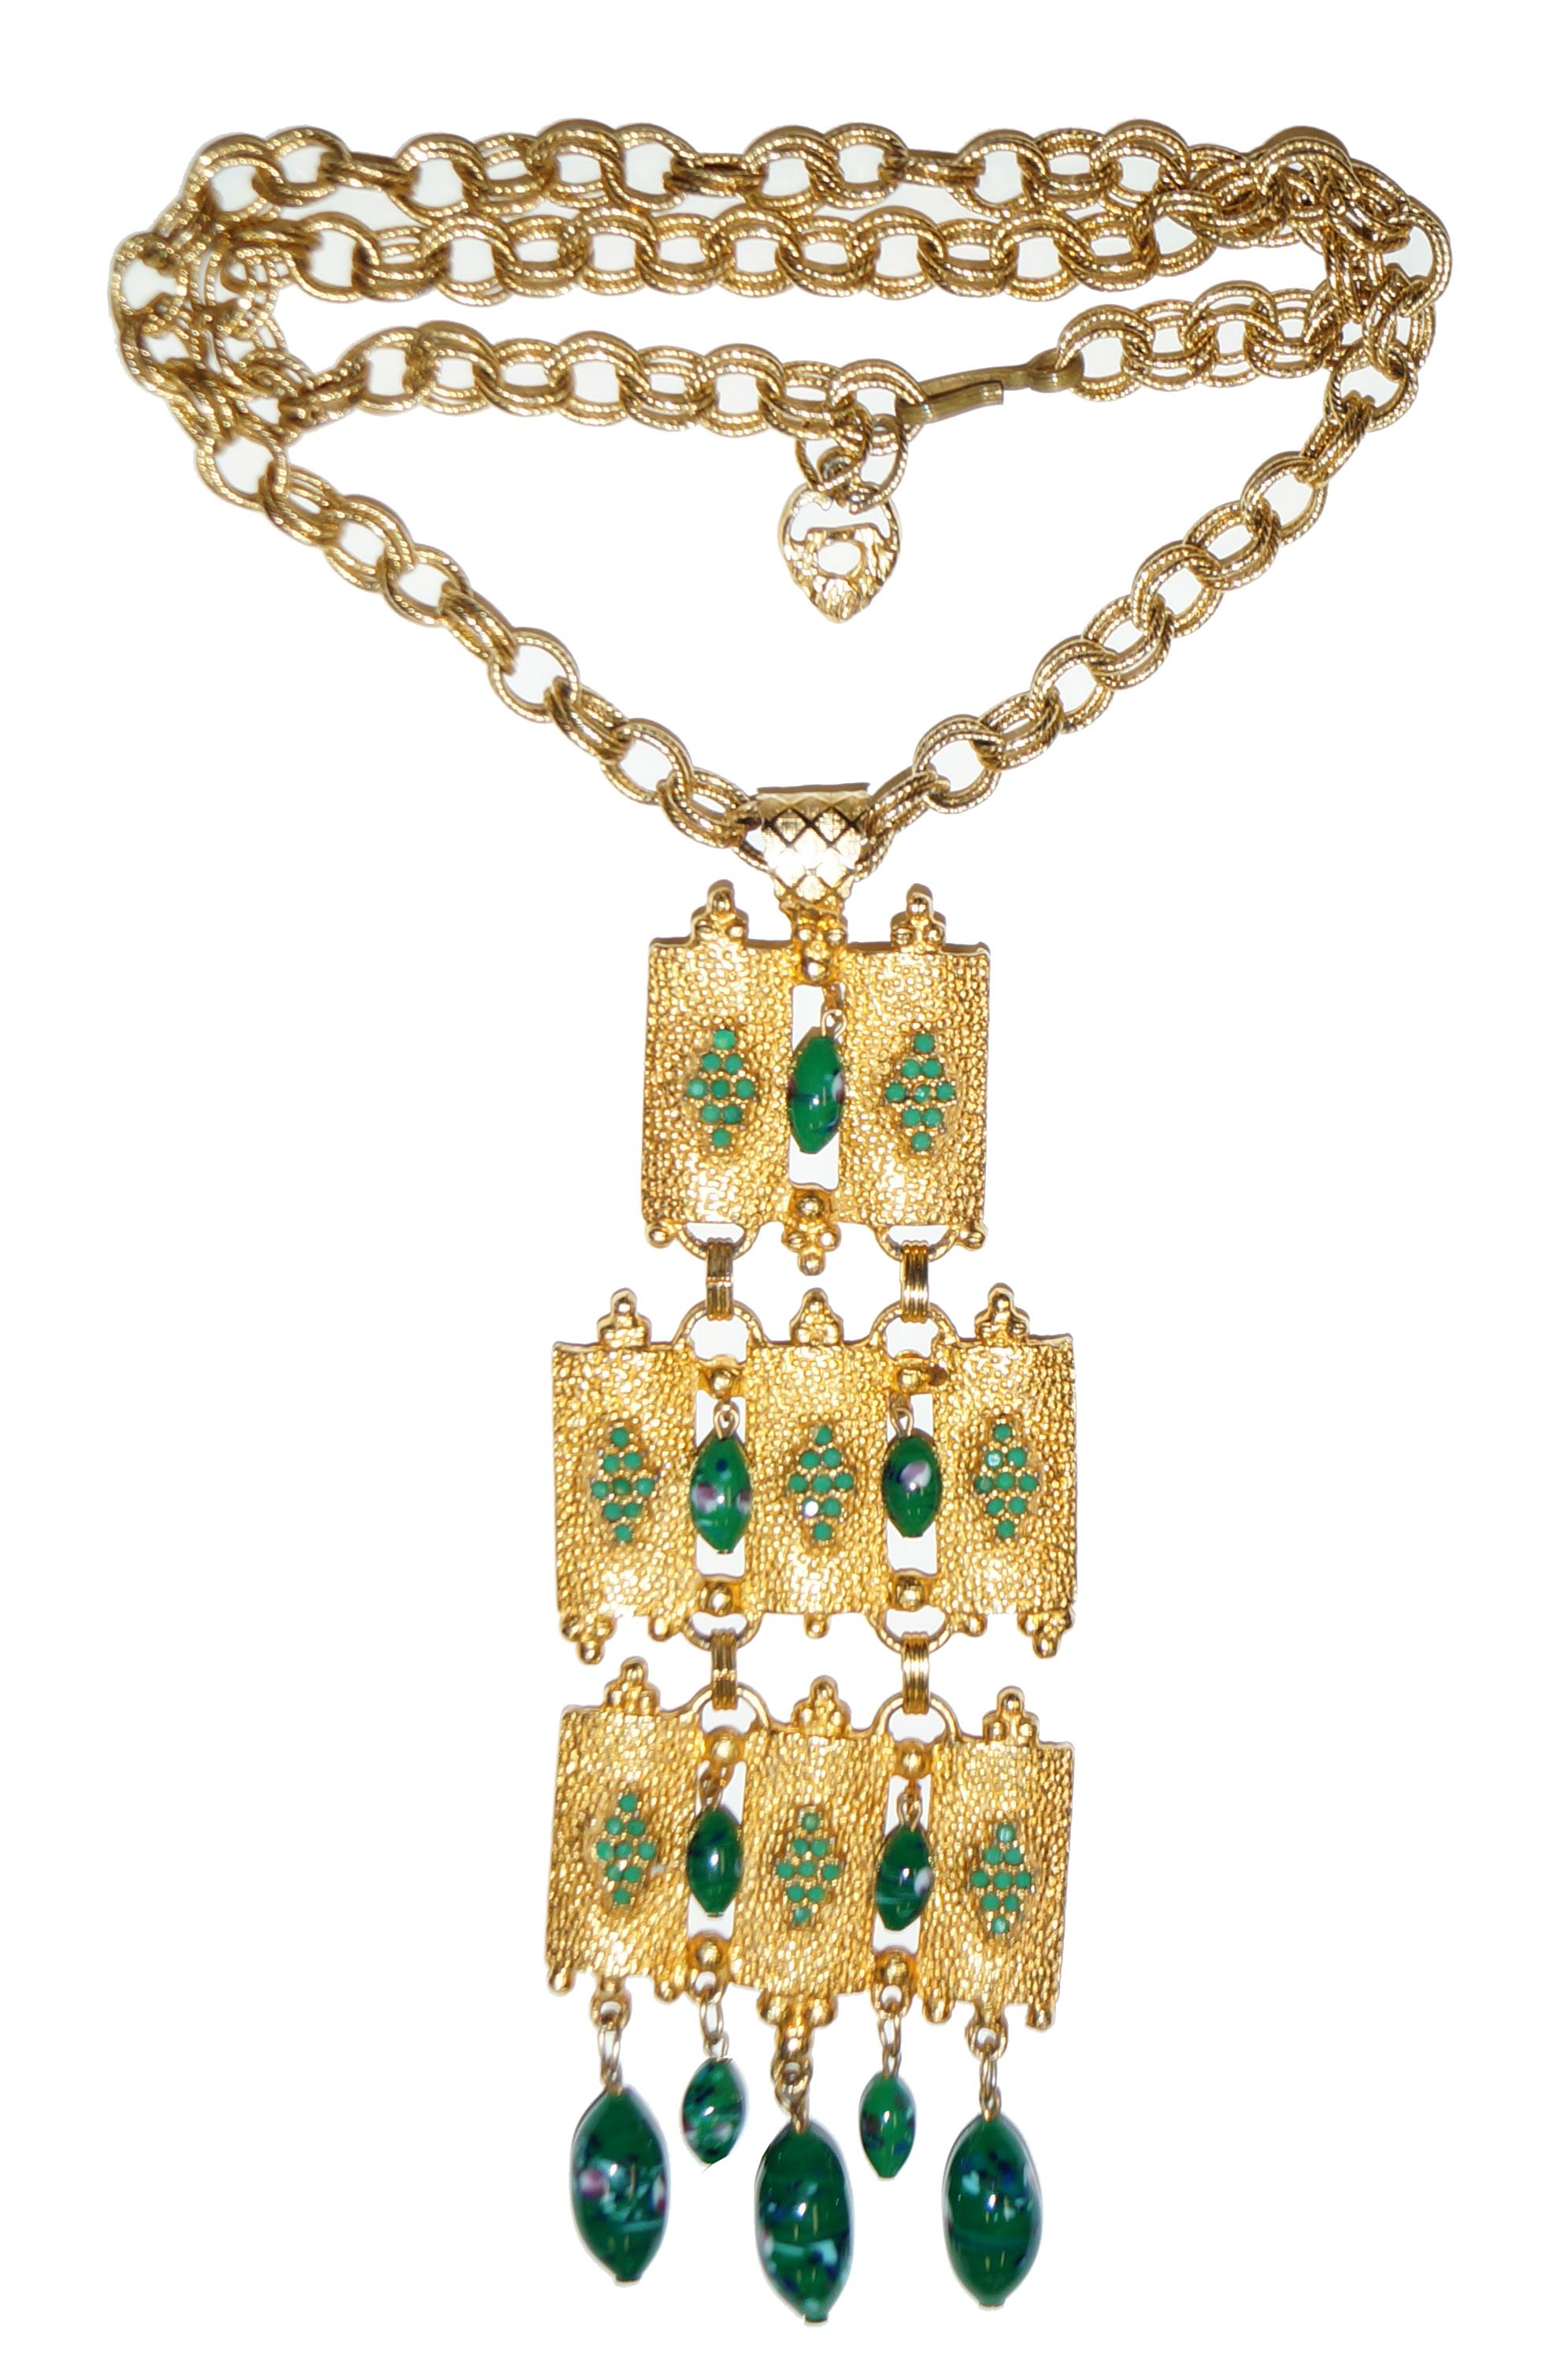 Large scale brutalist pendant hangs from long gold chain made of double rings. Pendant has green poured glass dangling beads and opaque green rhinestones inlaid in a diamond pattern. Three sections are connected with gold loops enabling movement.